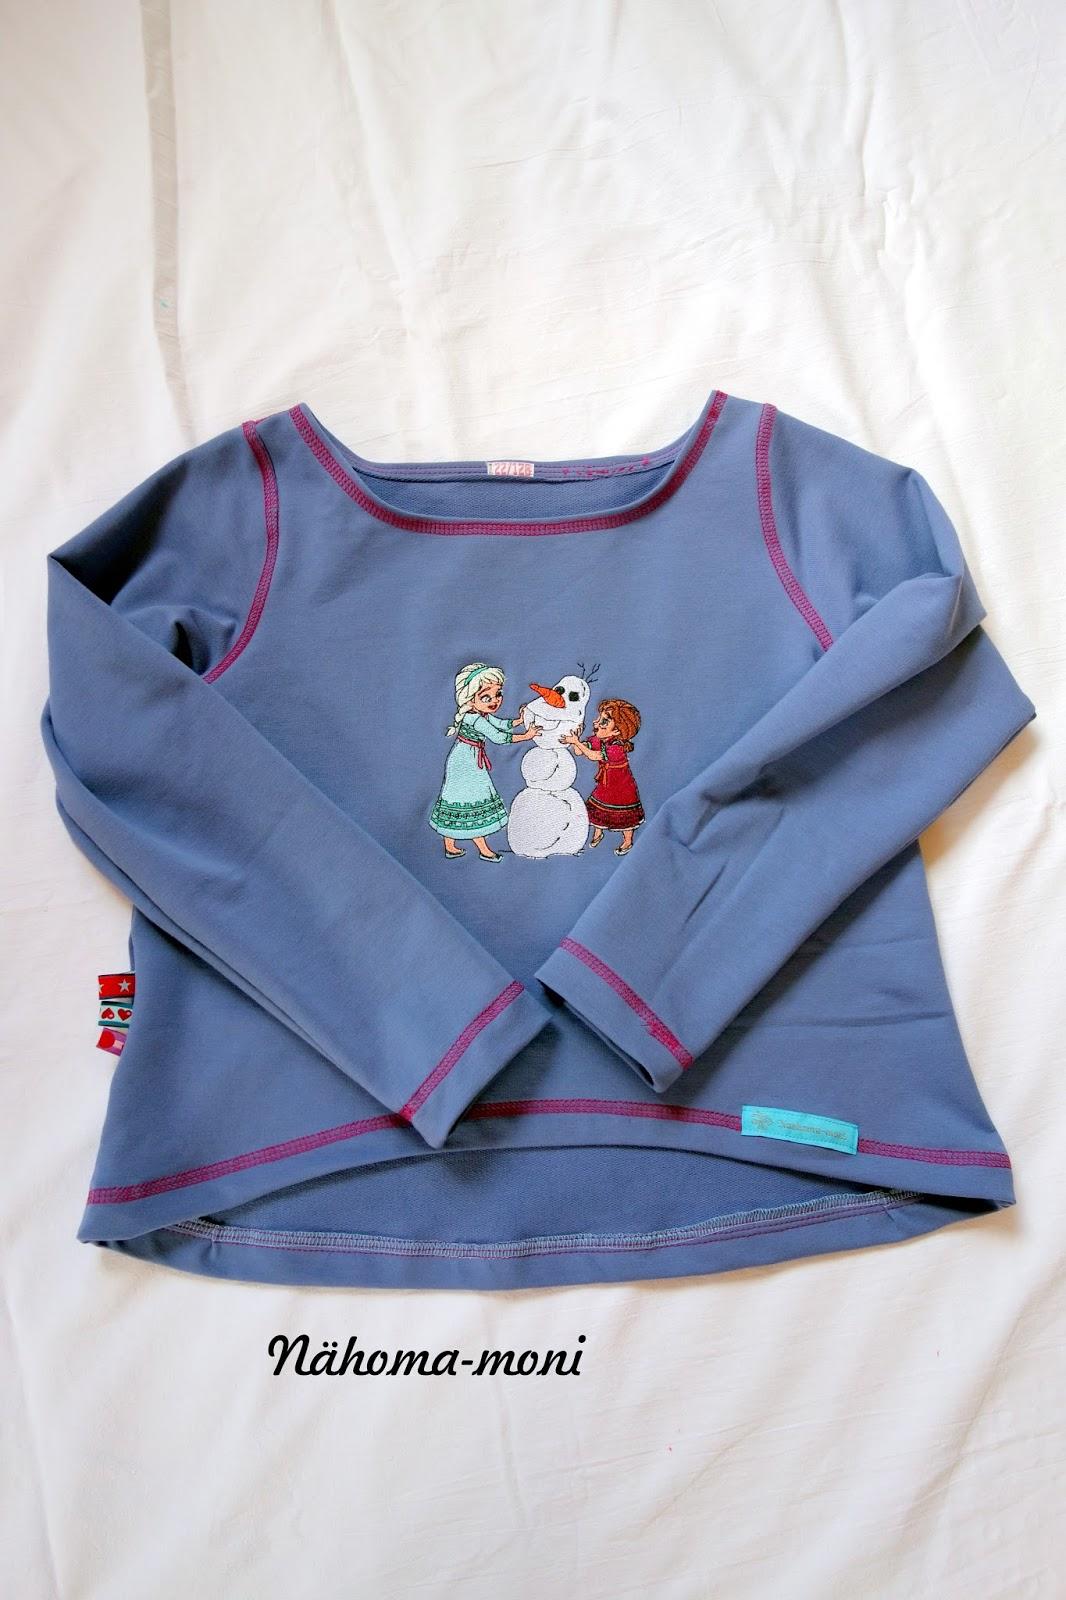 Shirt with Anna and Elsa make Olaf the snowman embroidery design